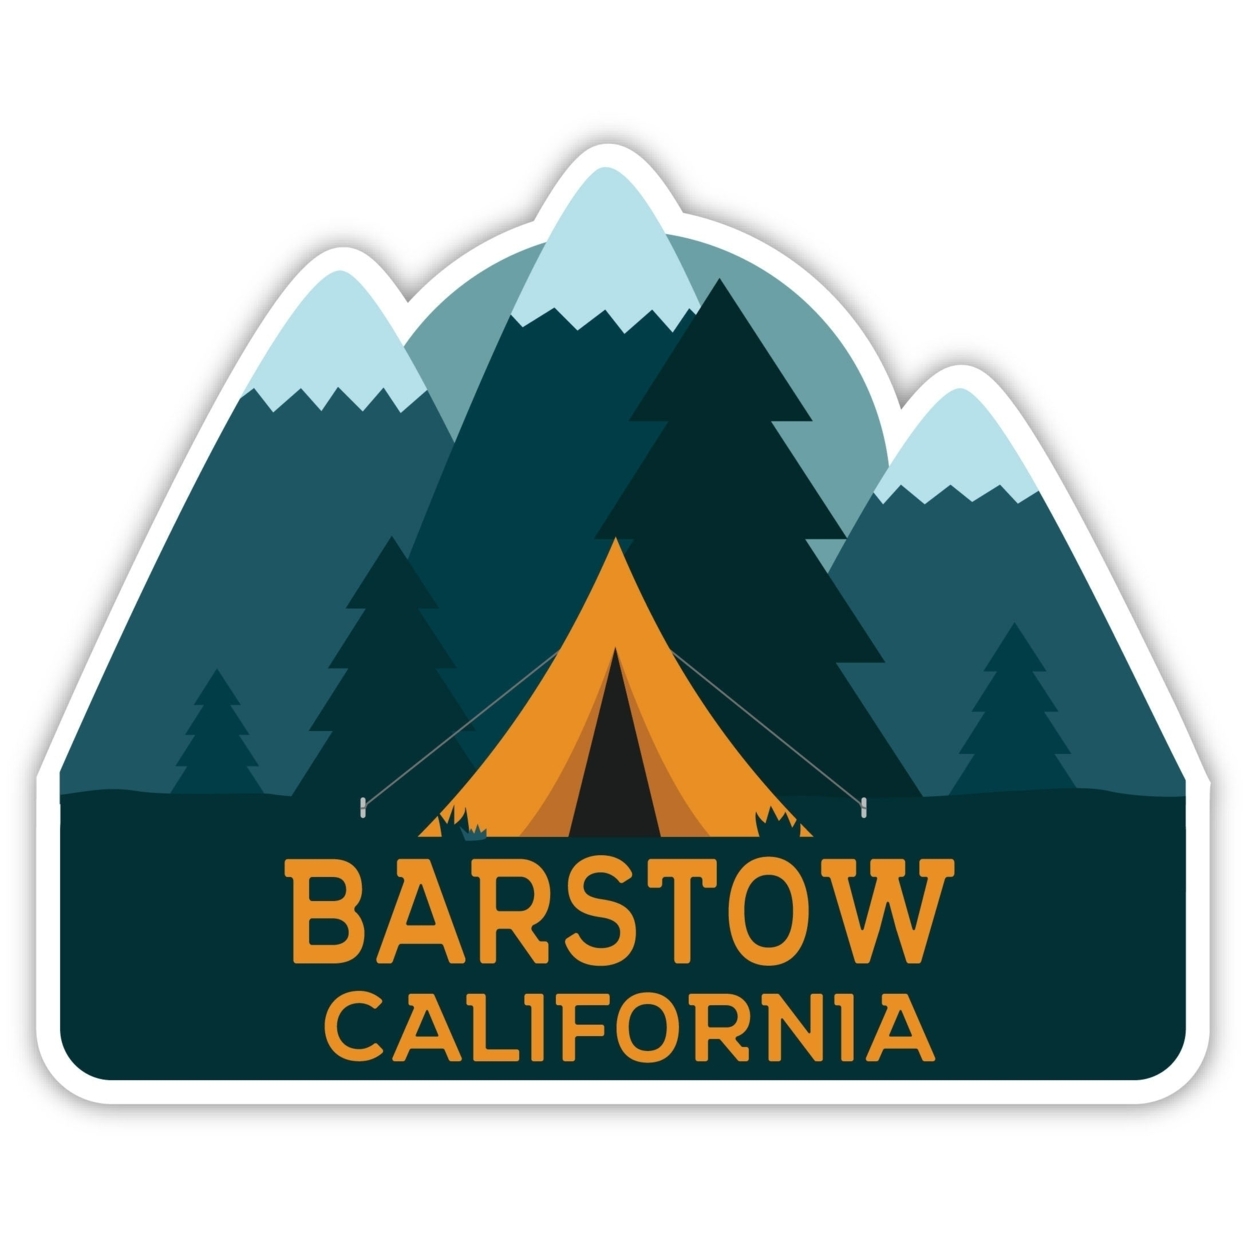 Barstow California Souvenir Decorative Stickers (Choose Theme And Size) - Single Unit, 2-Inch, Adventures Awaits